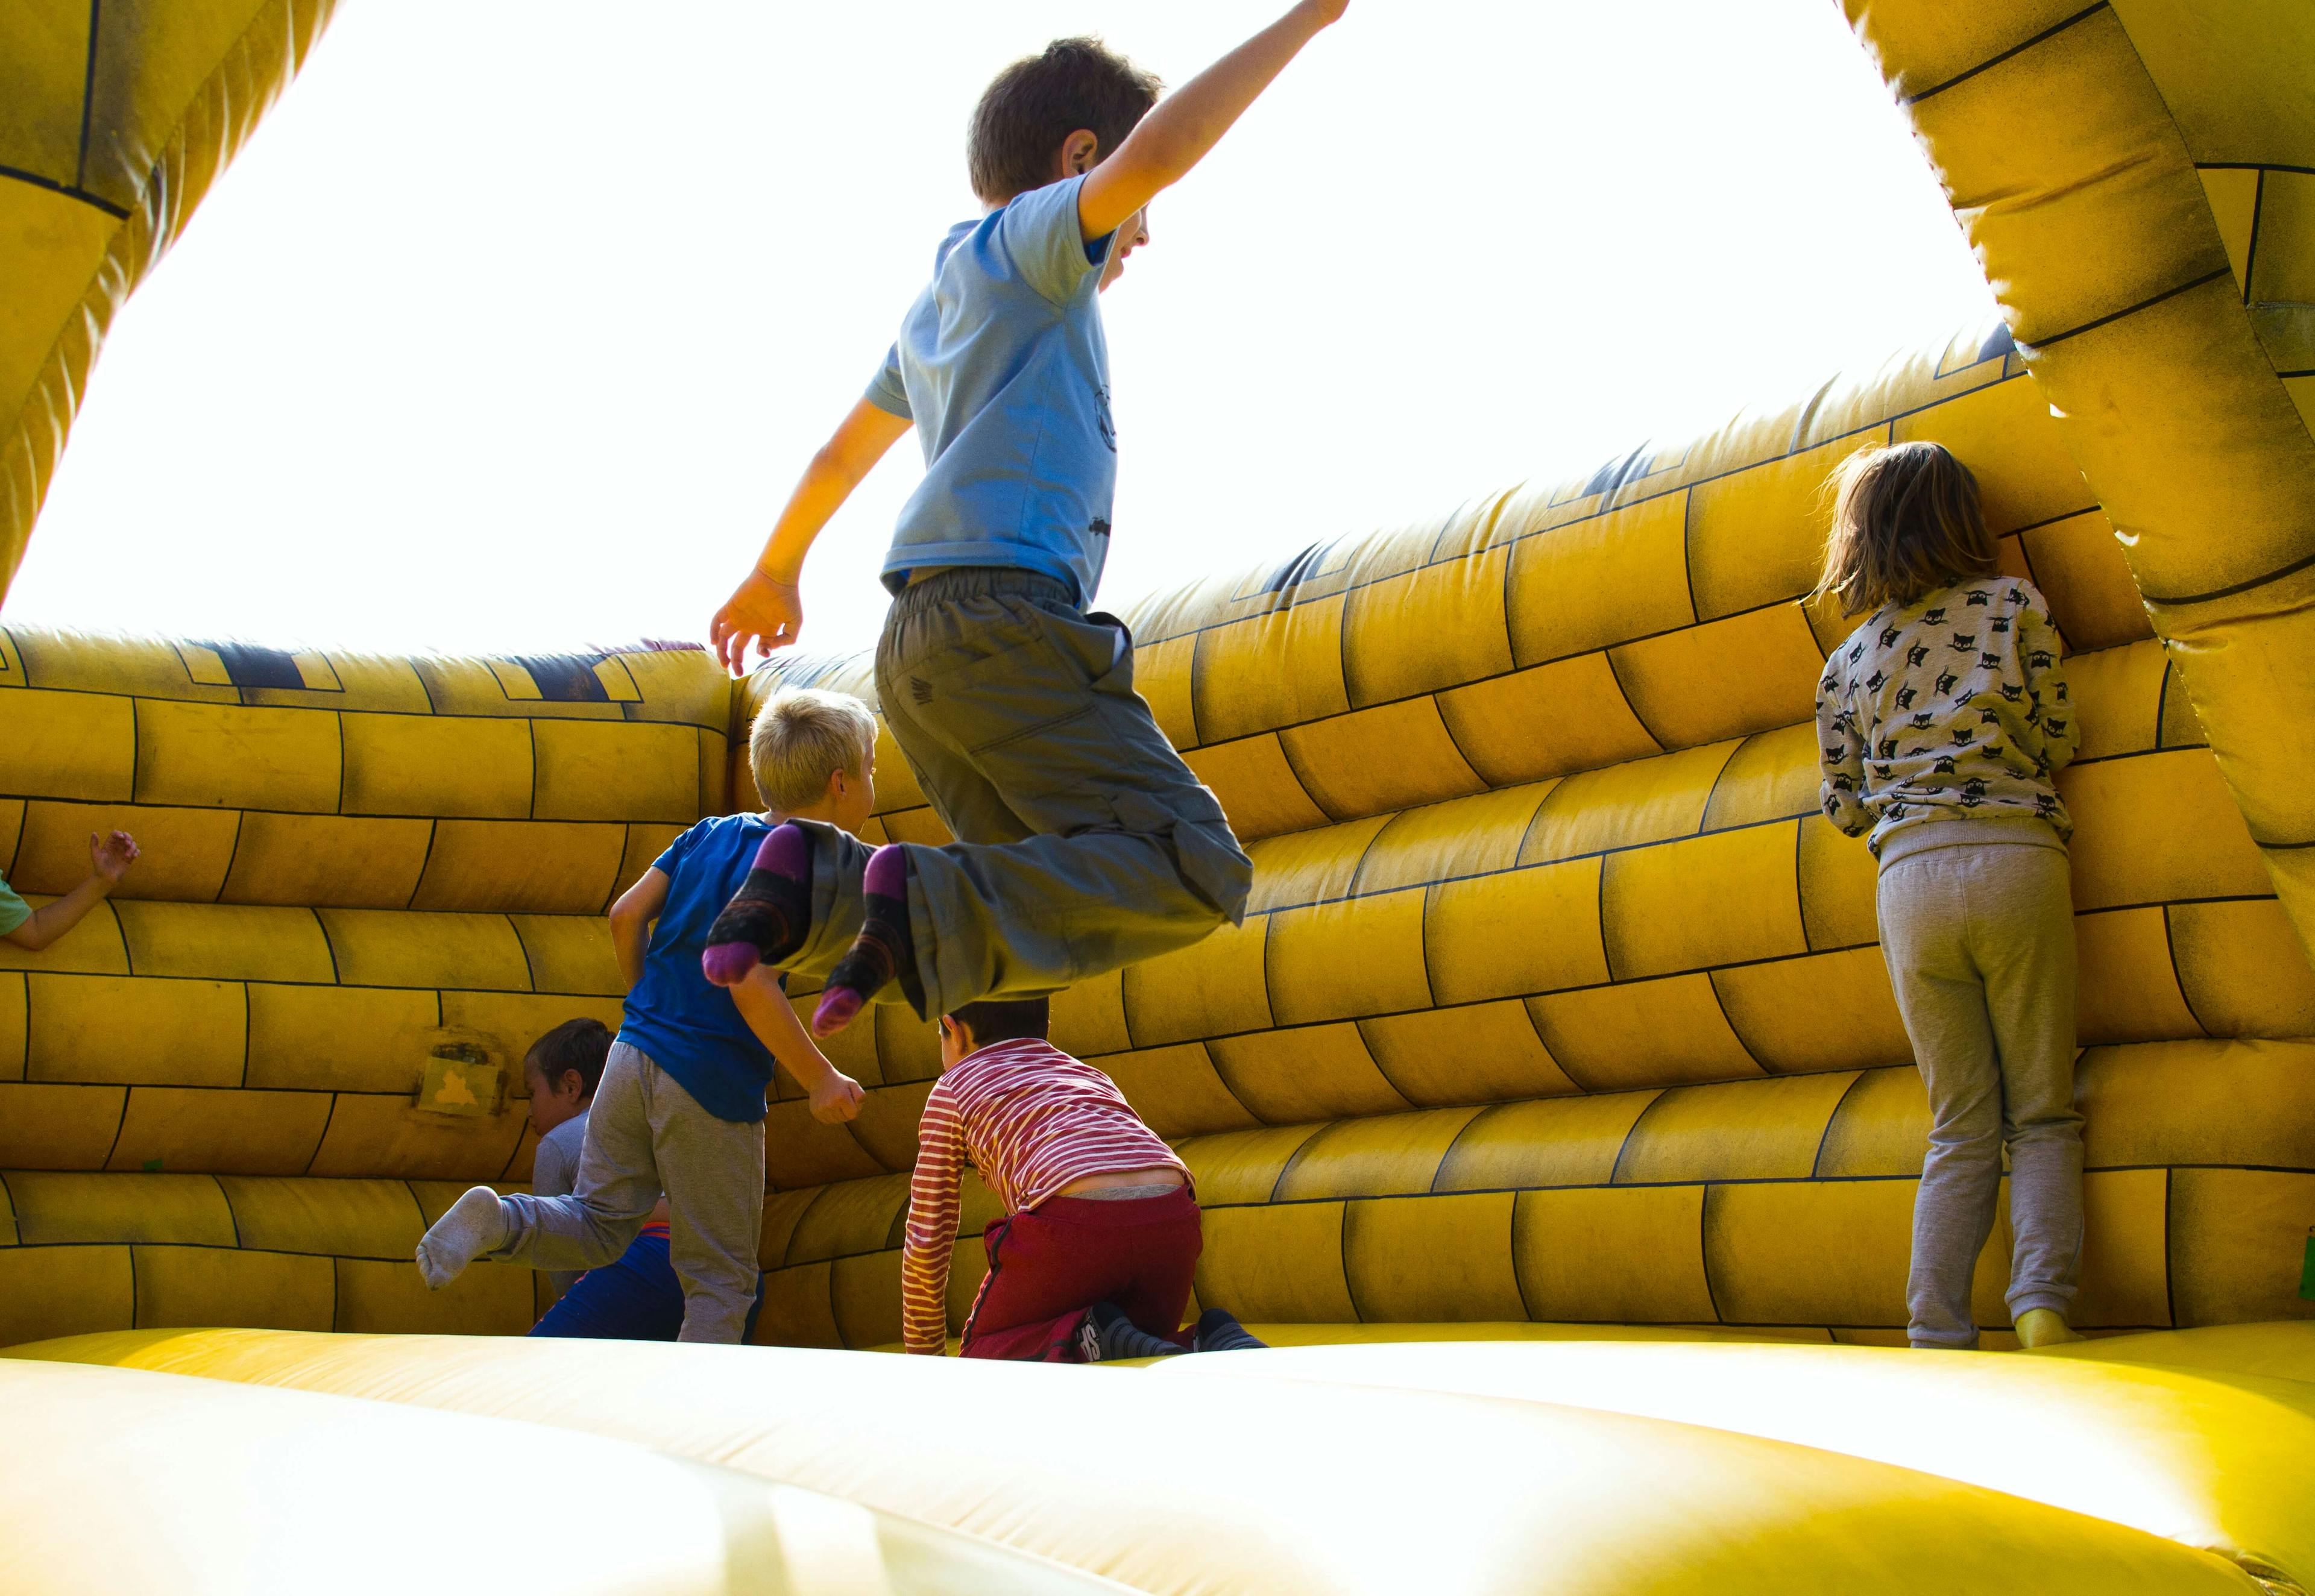 Kids playing on an inflatable